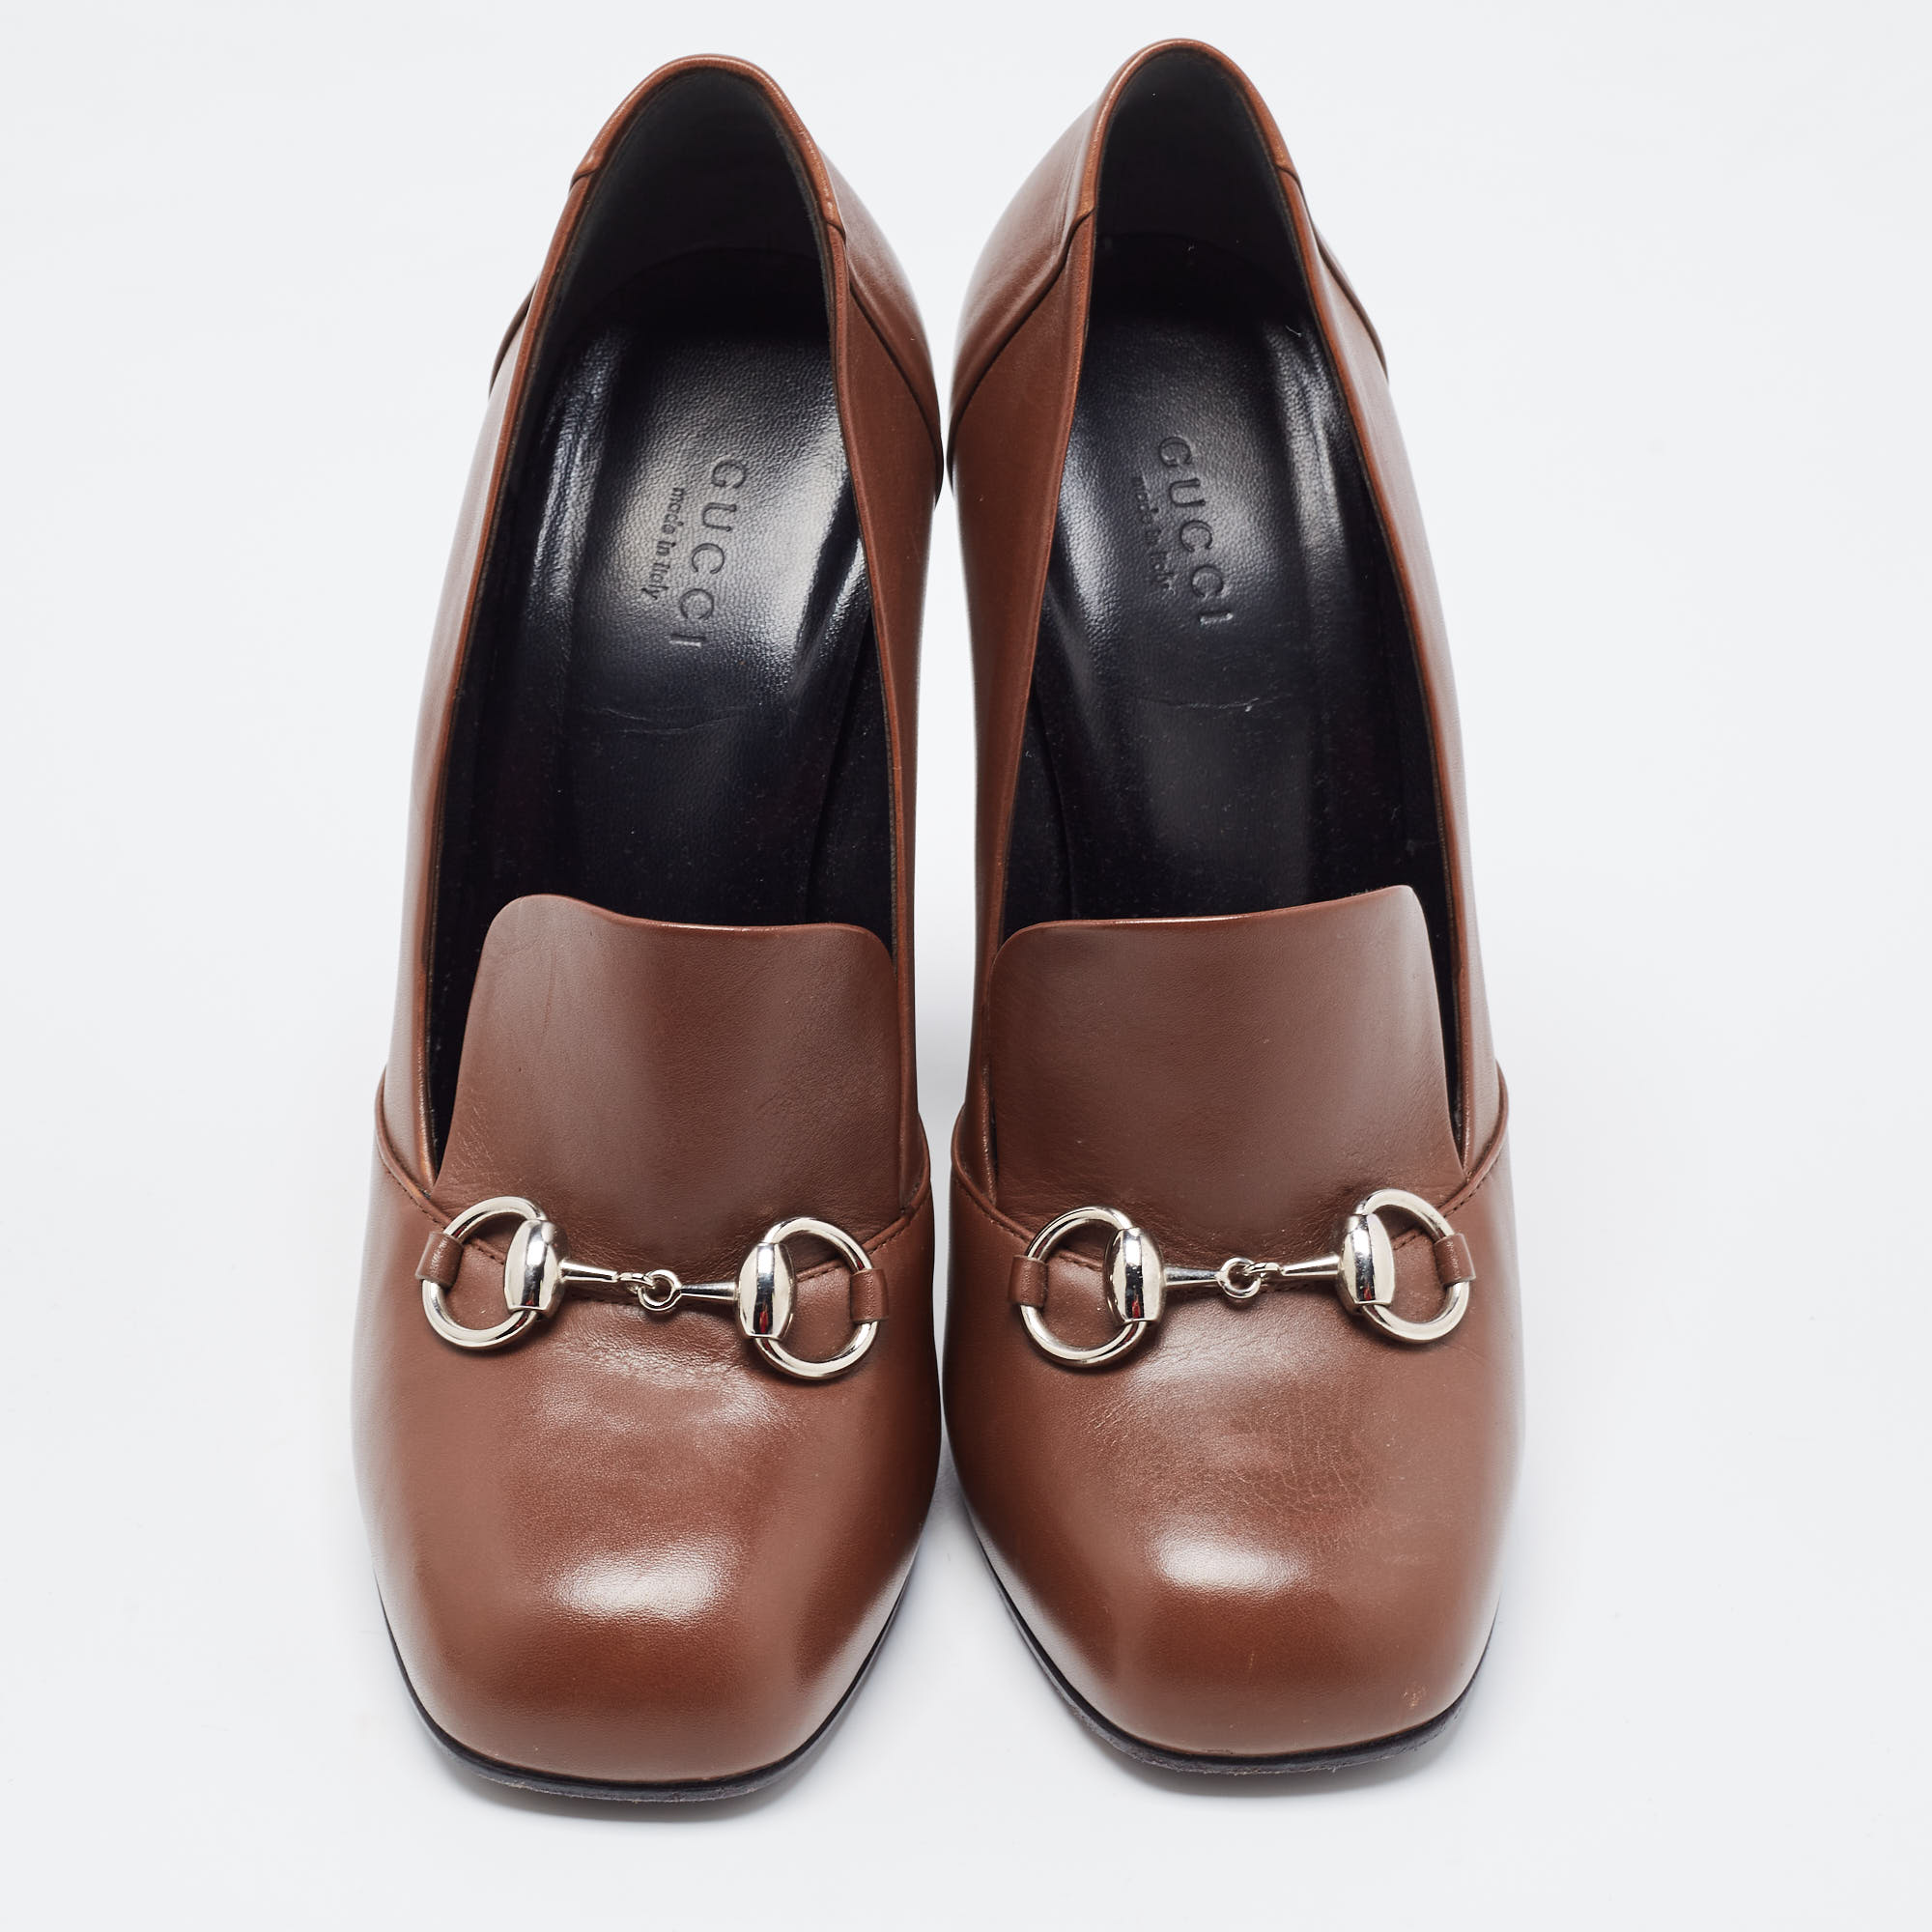 Gucci Brown Leather Loafer Pumps Size 38.5